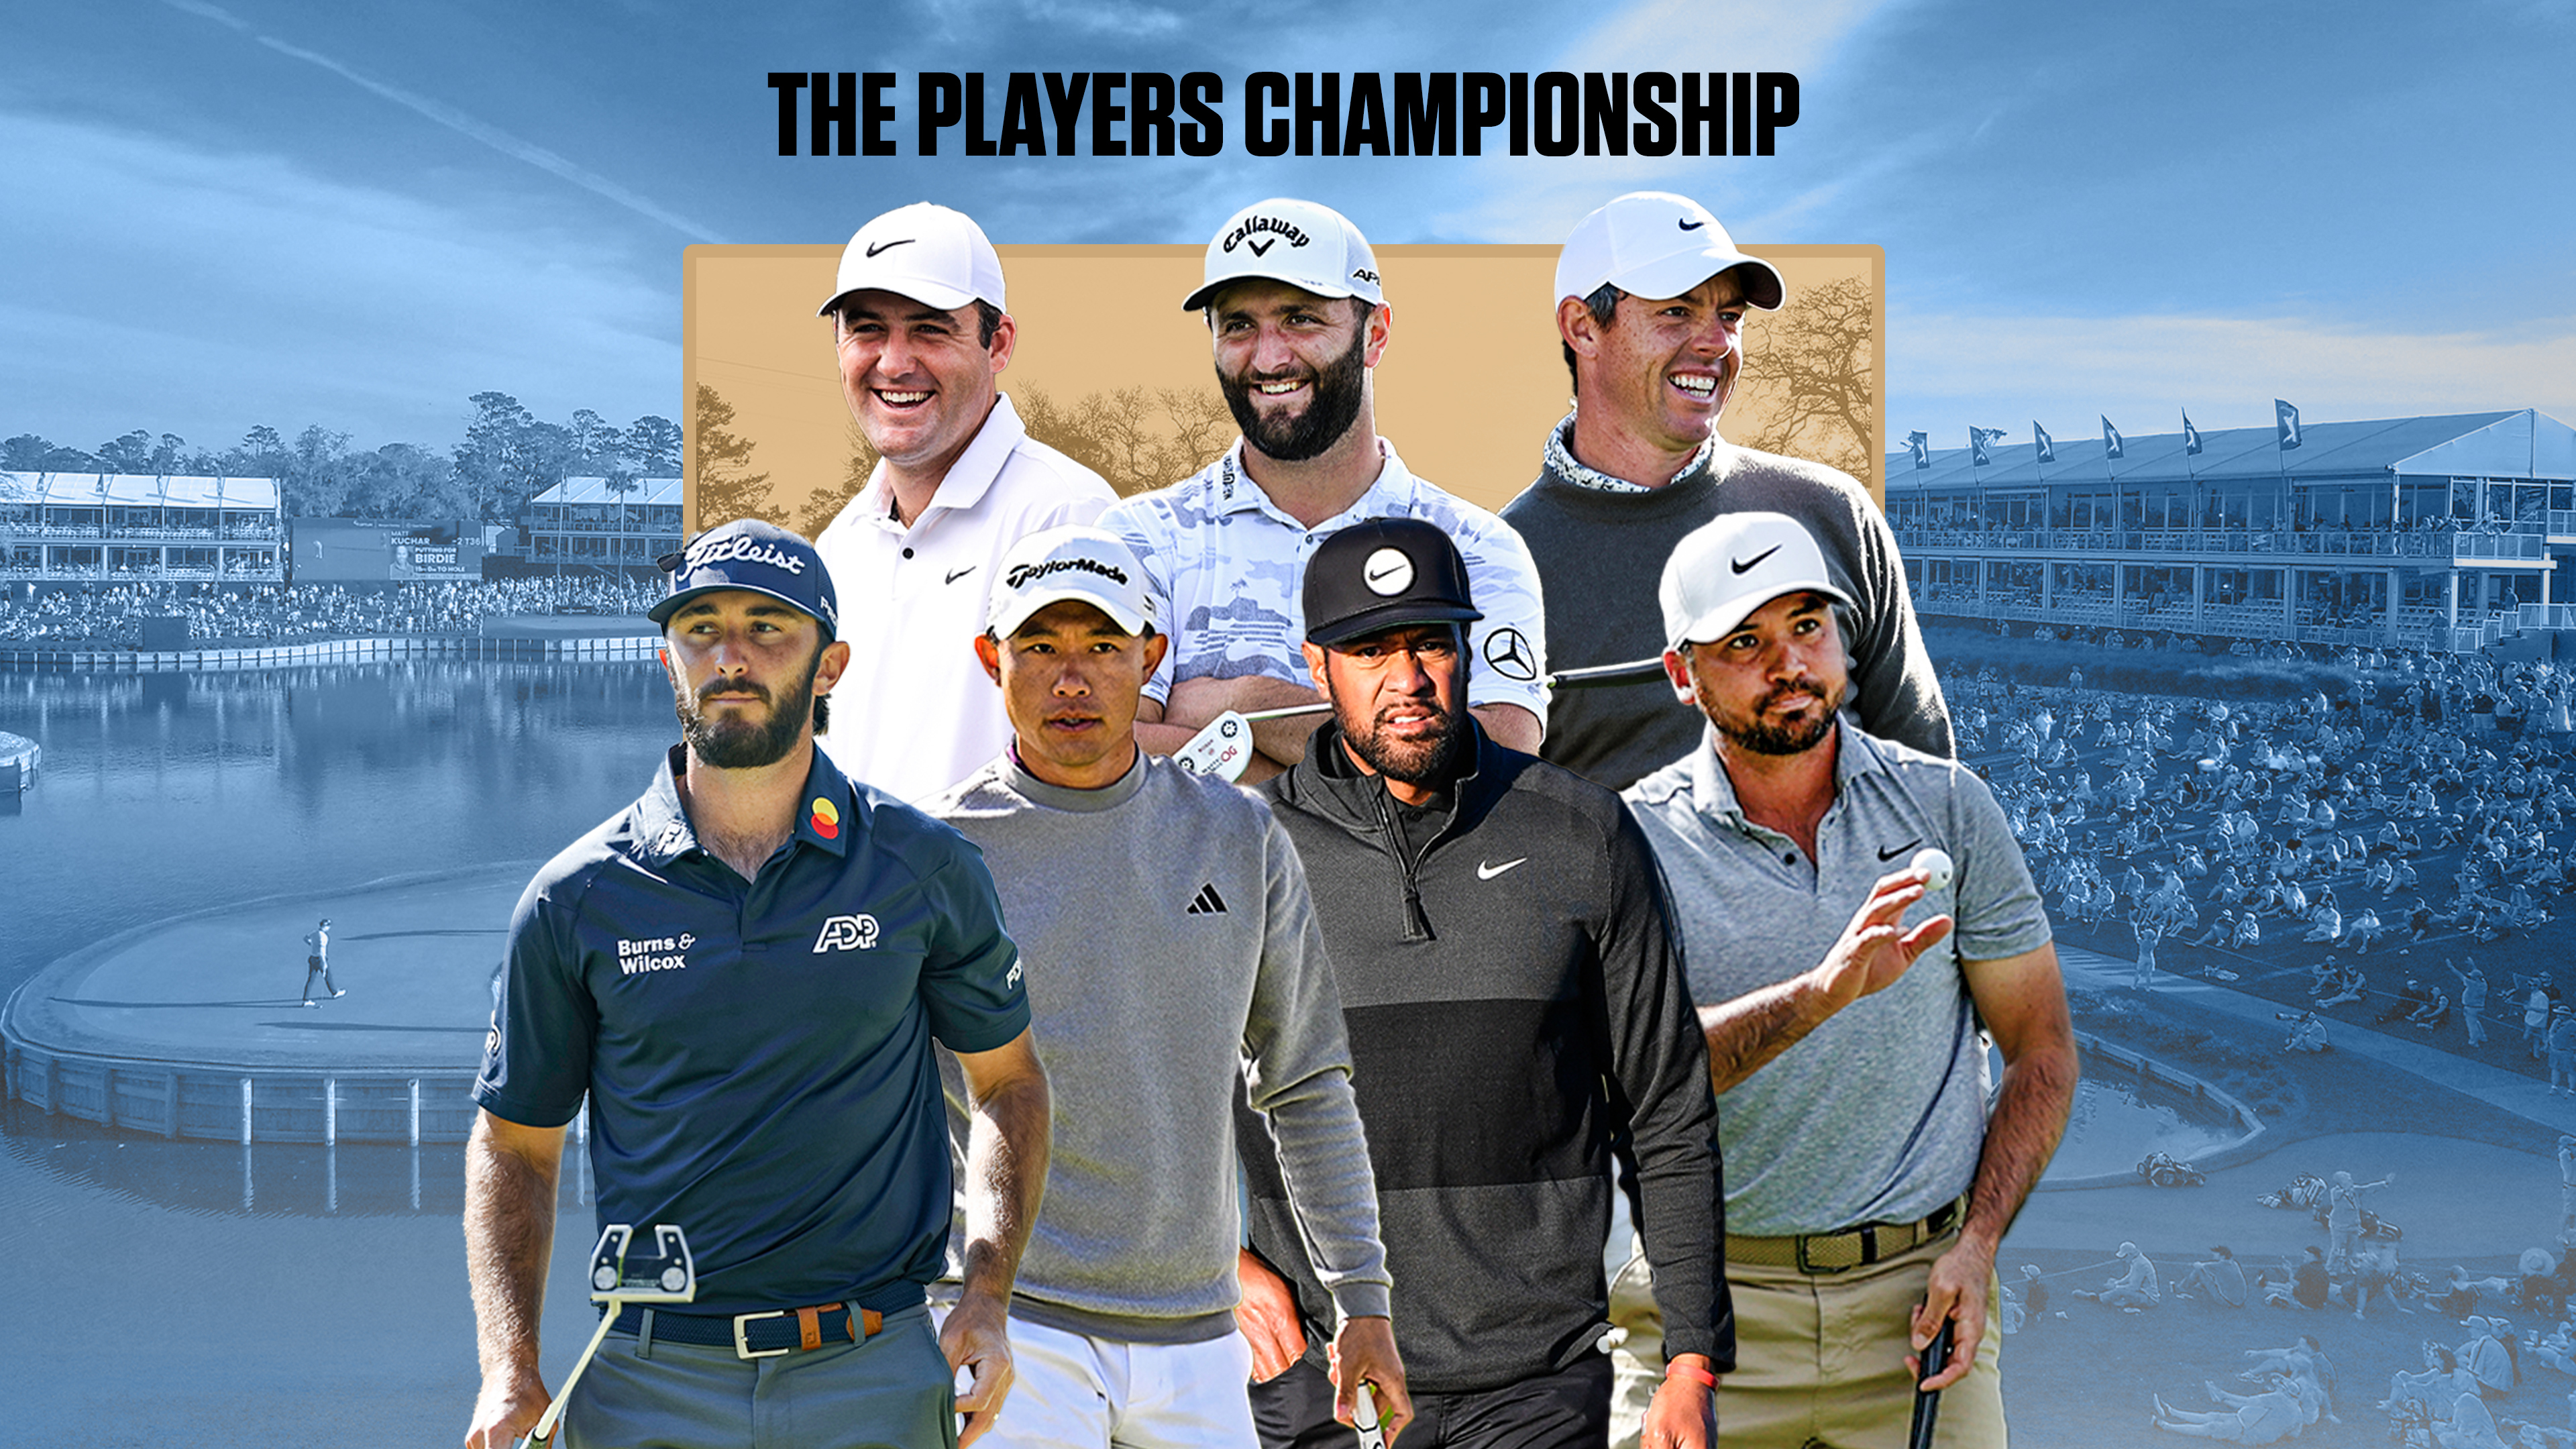 Players 2023 The top 100 golfers competing at TPC Sawgrass, ranked Golf News and Tour Information GolfDigest